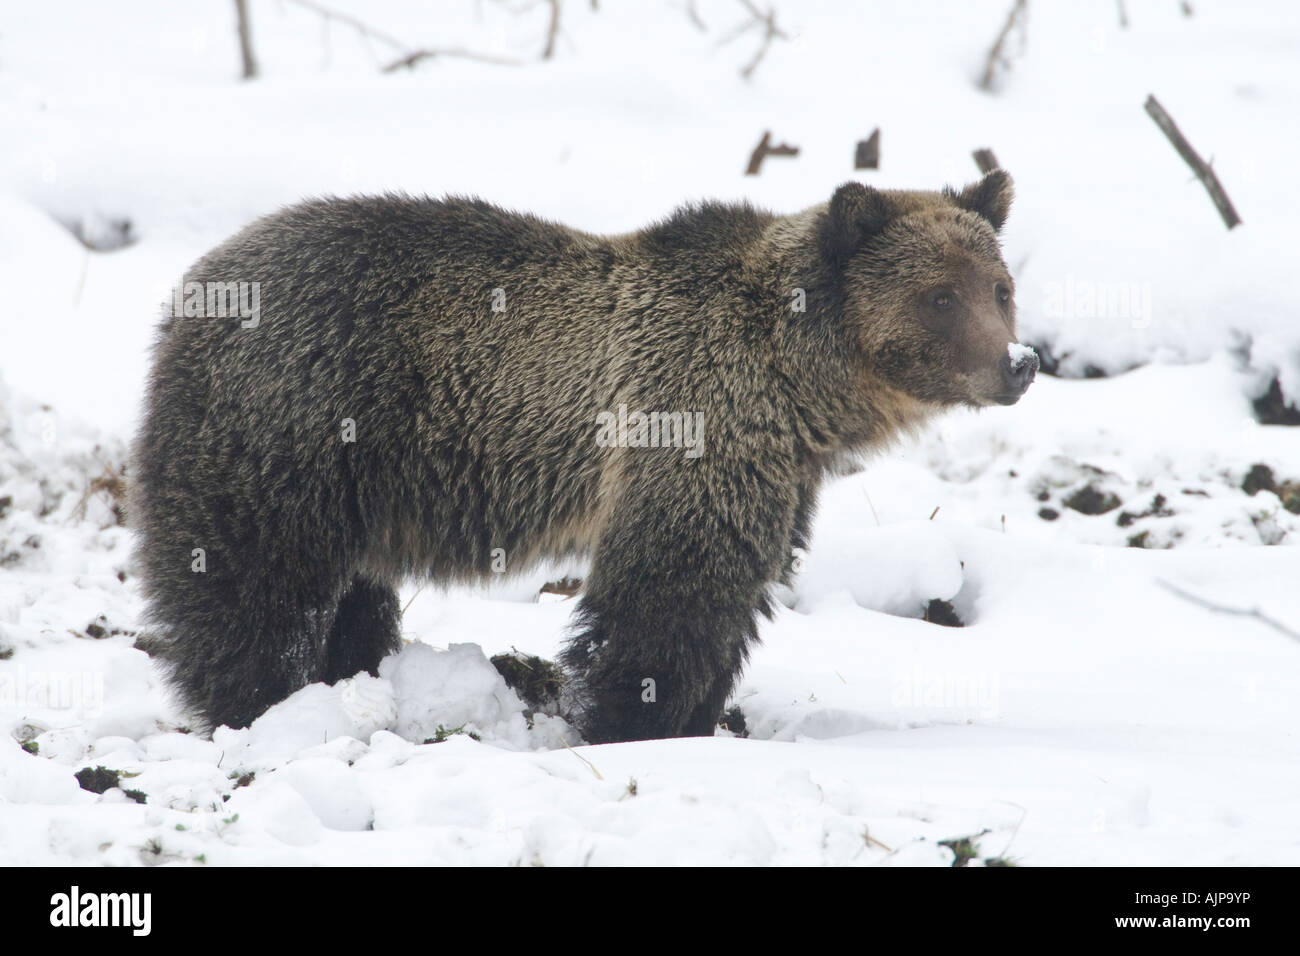 Grizzly bear in autumn snow Stock Photo